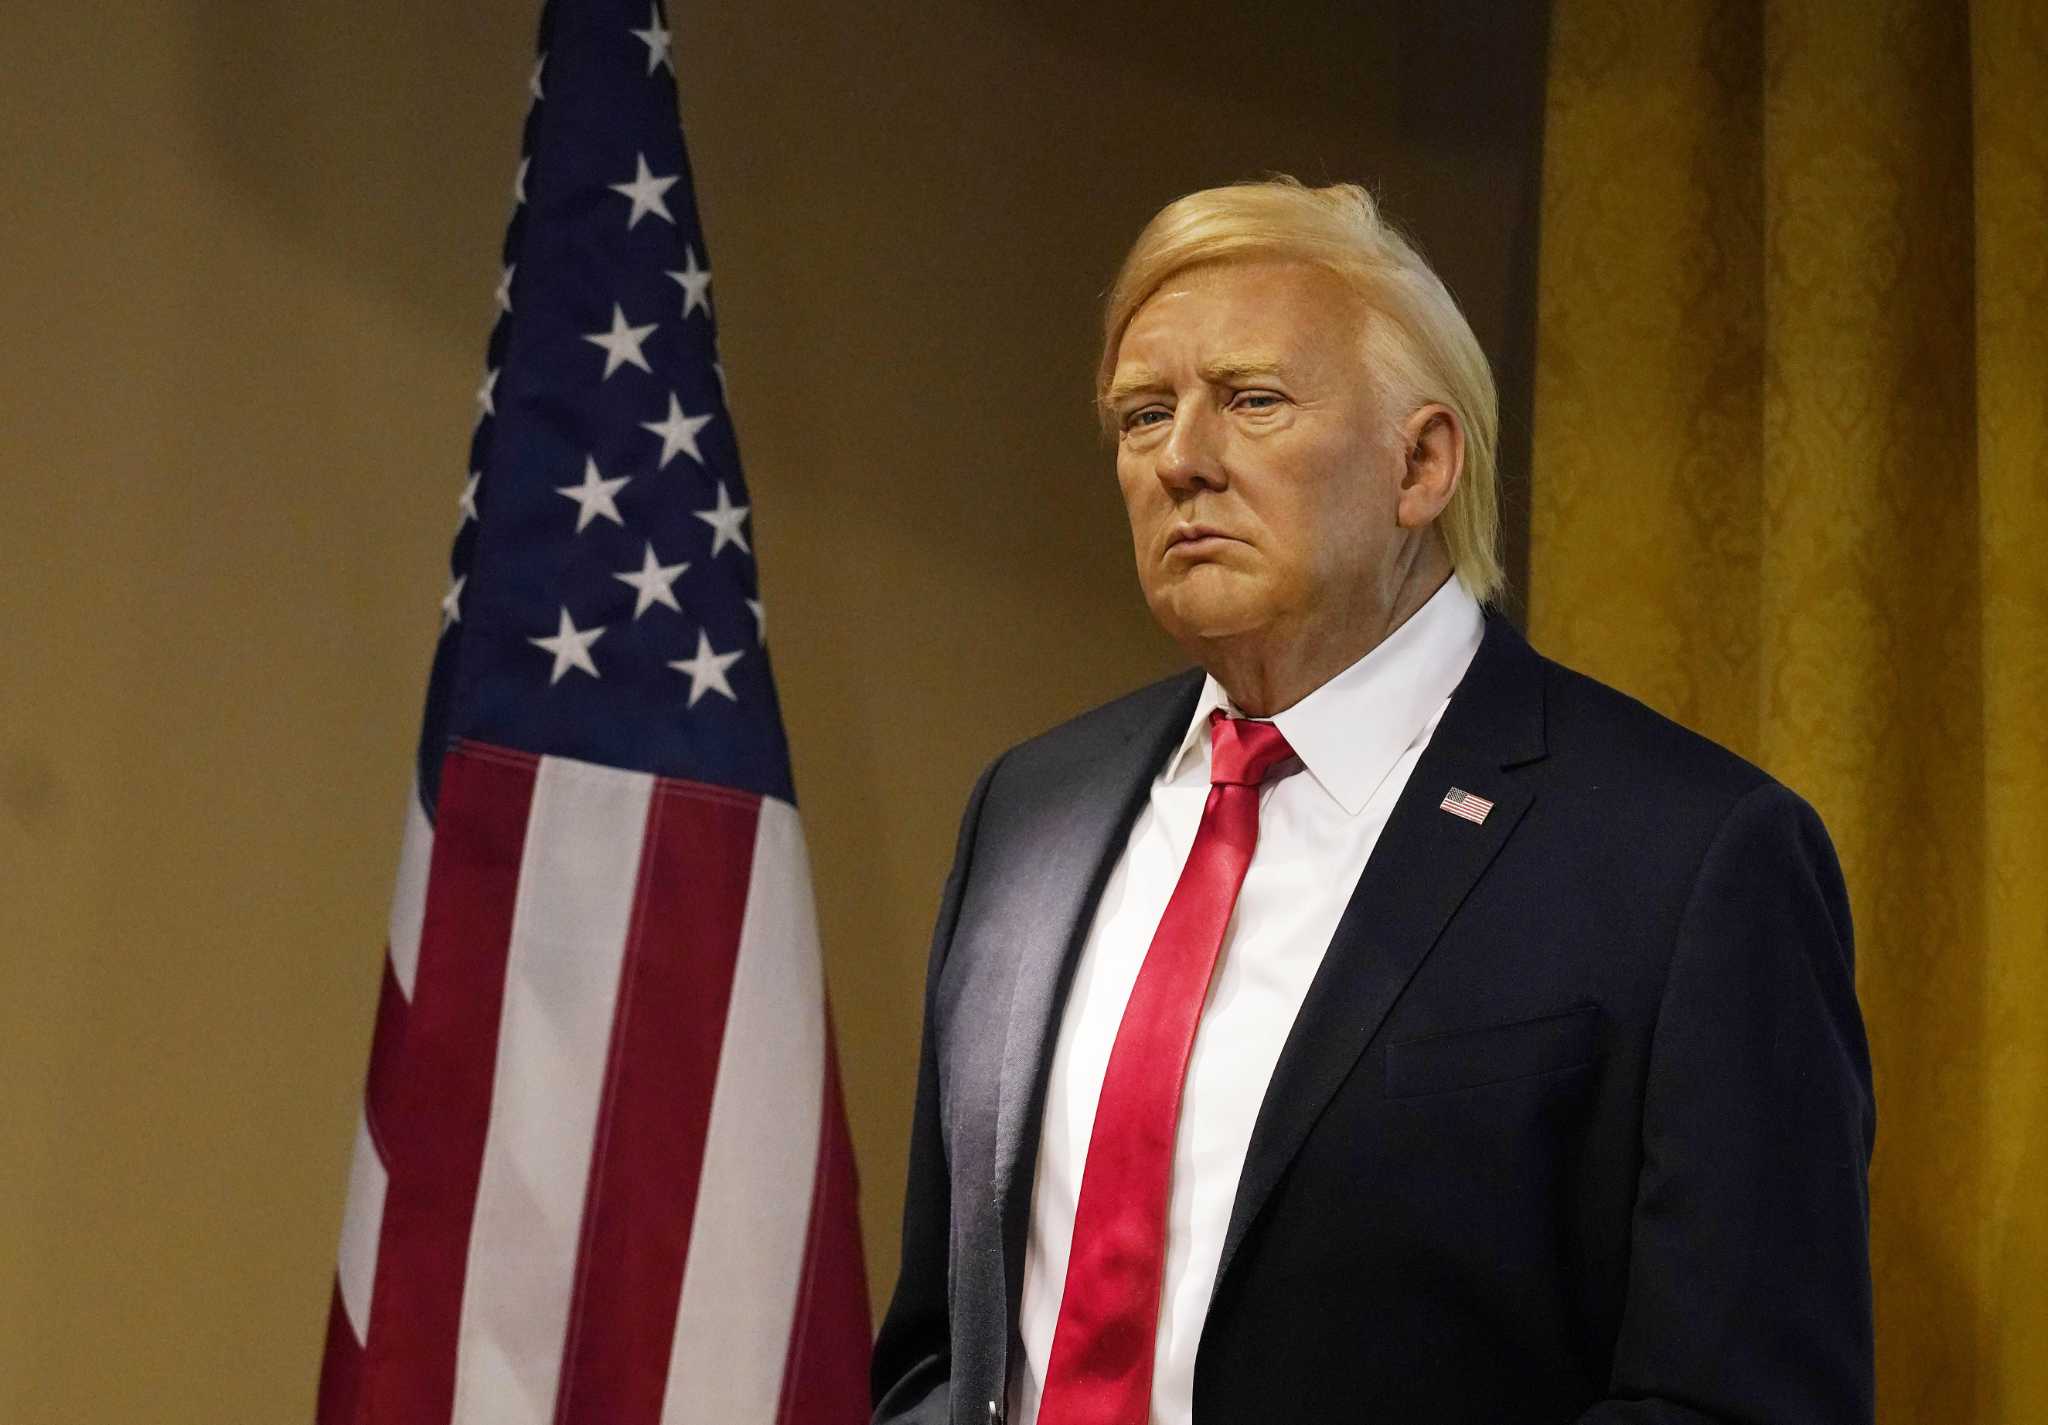 Trump Wax Statue Removed Because People Keep Punching It in Museum